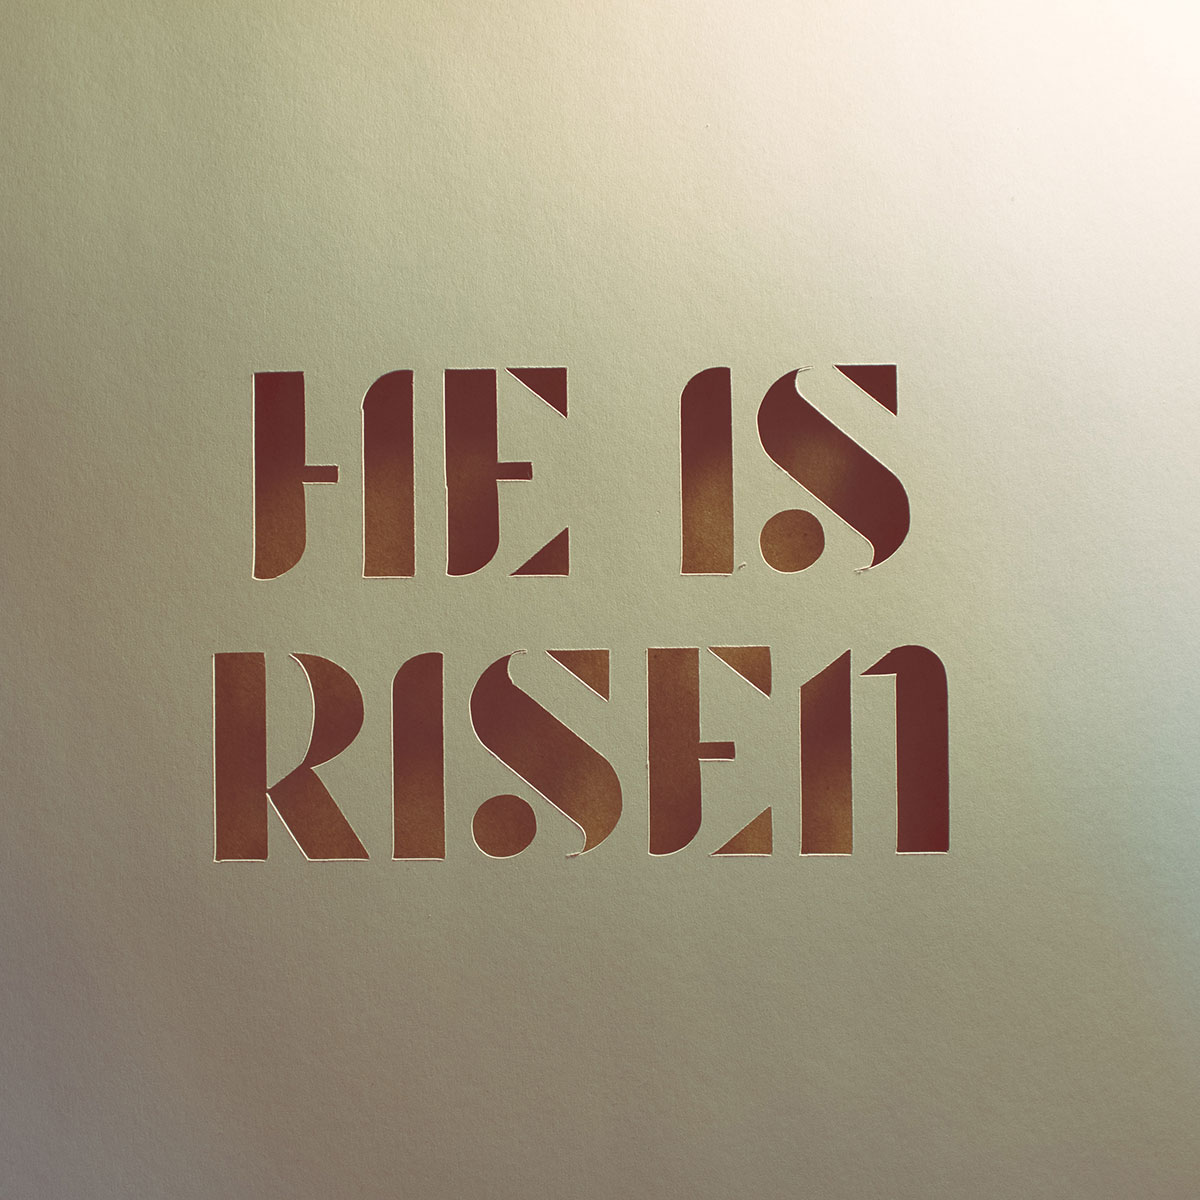 He is Risen, Easter Sunday